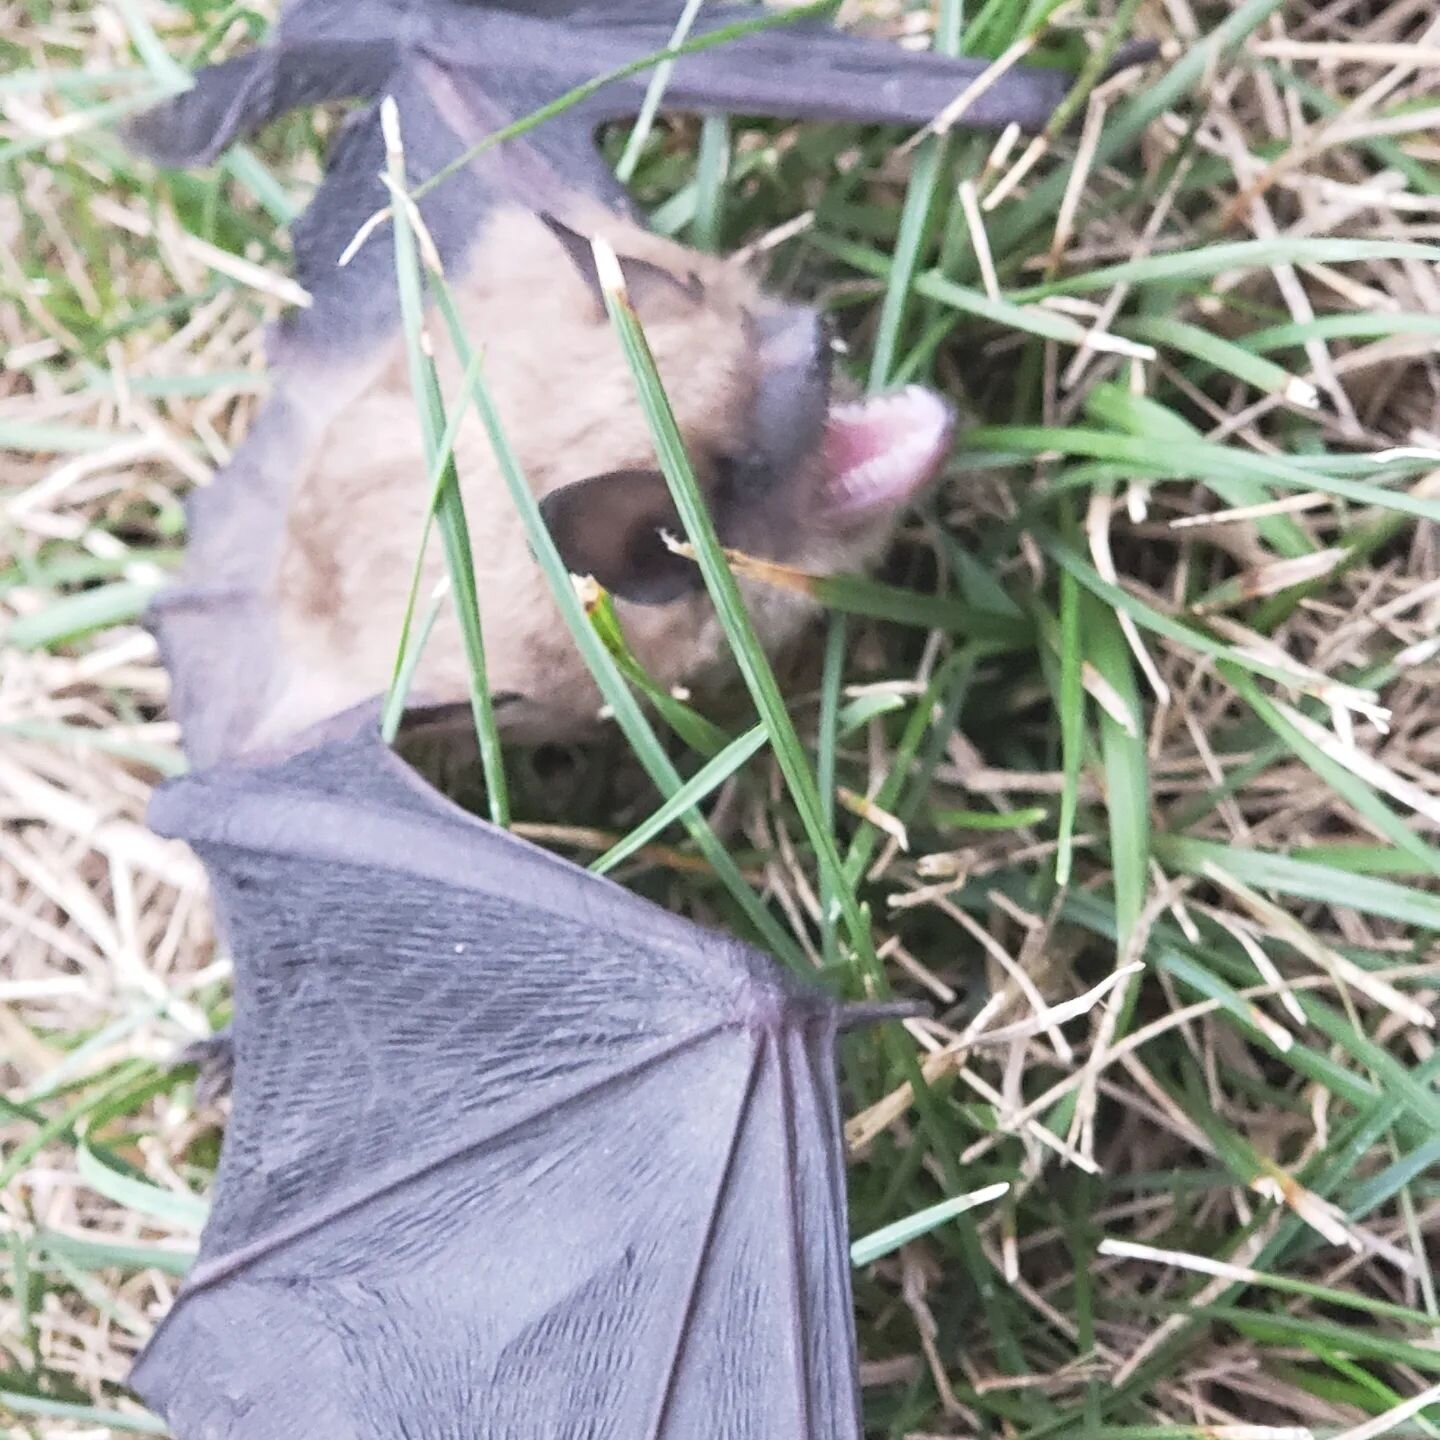 Our house is over 100 years old (circa 1900) and there are enough holes to let in bats. So we often have these lovely little visitors. We have graduated from putting coats on our heads and frantically trying to catch them as they dart for our heads t